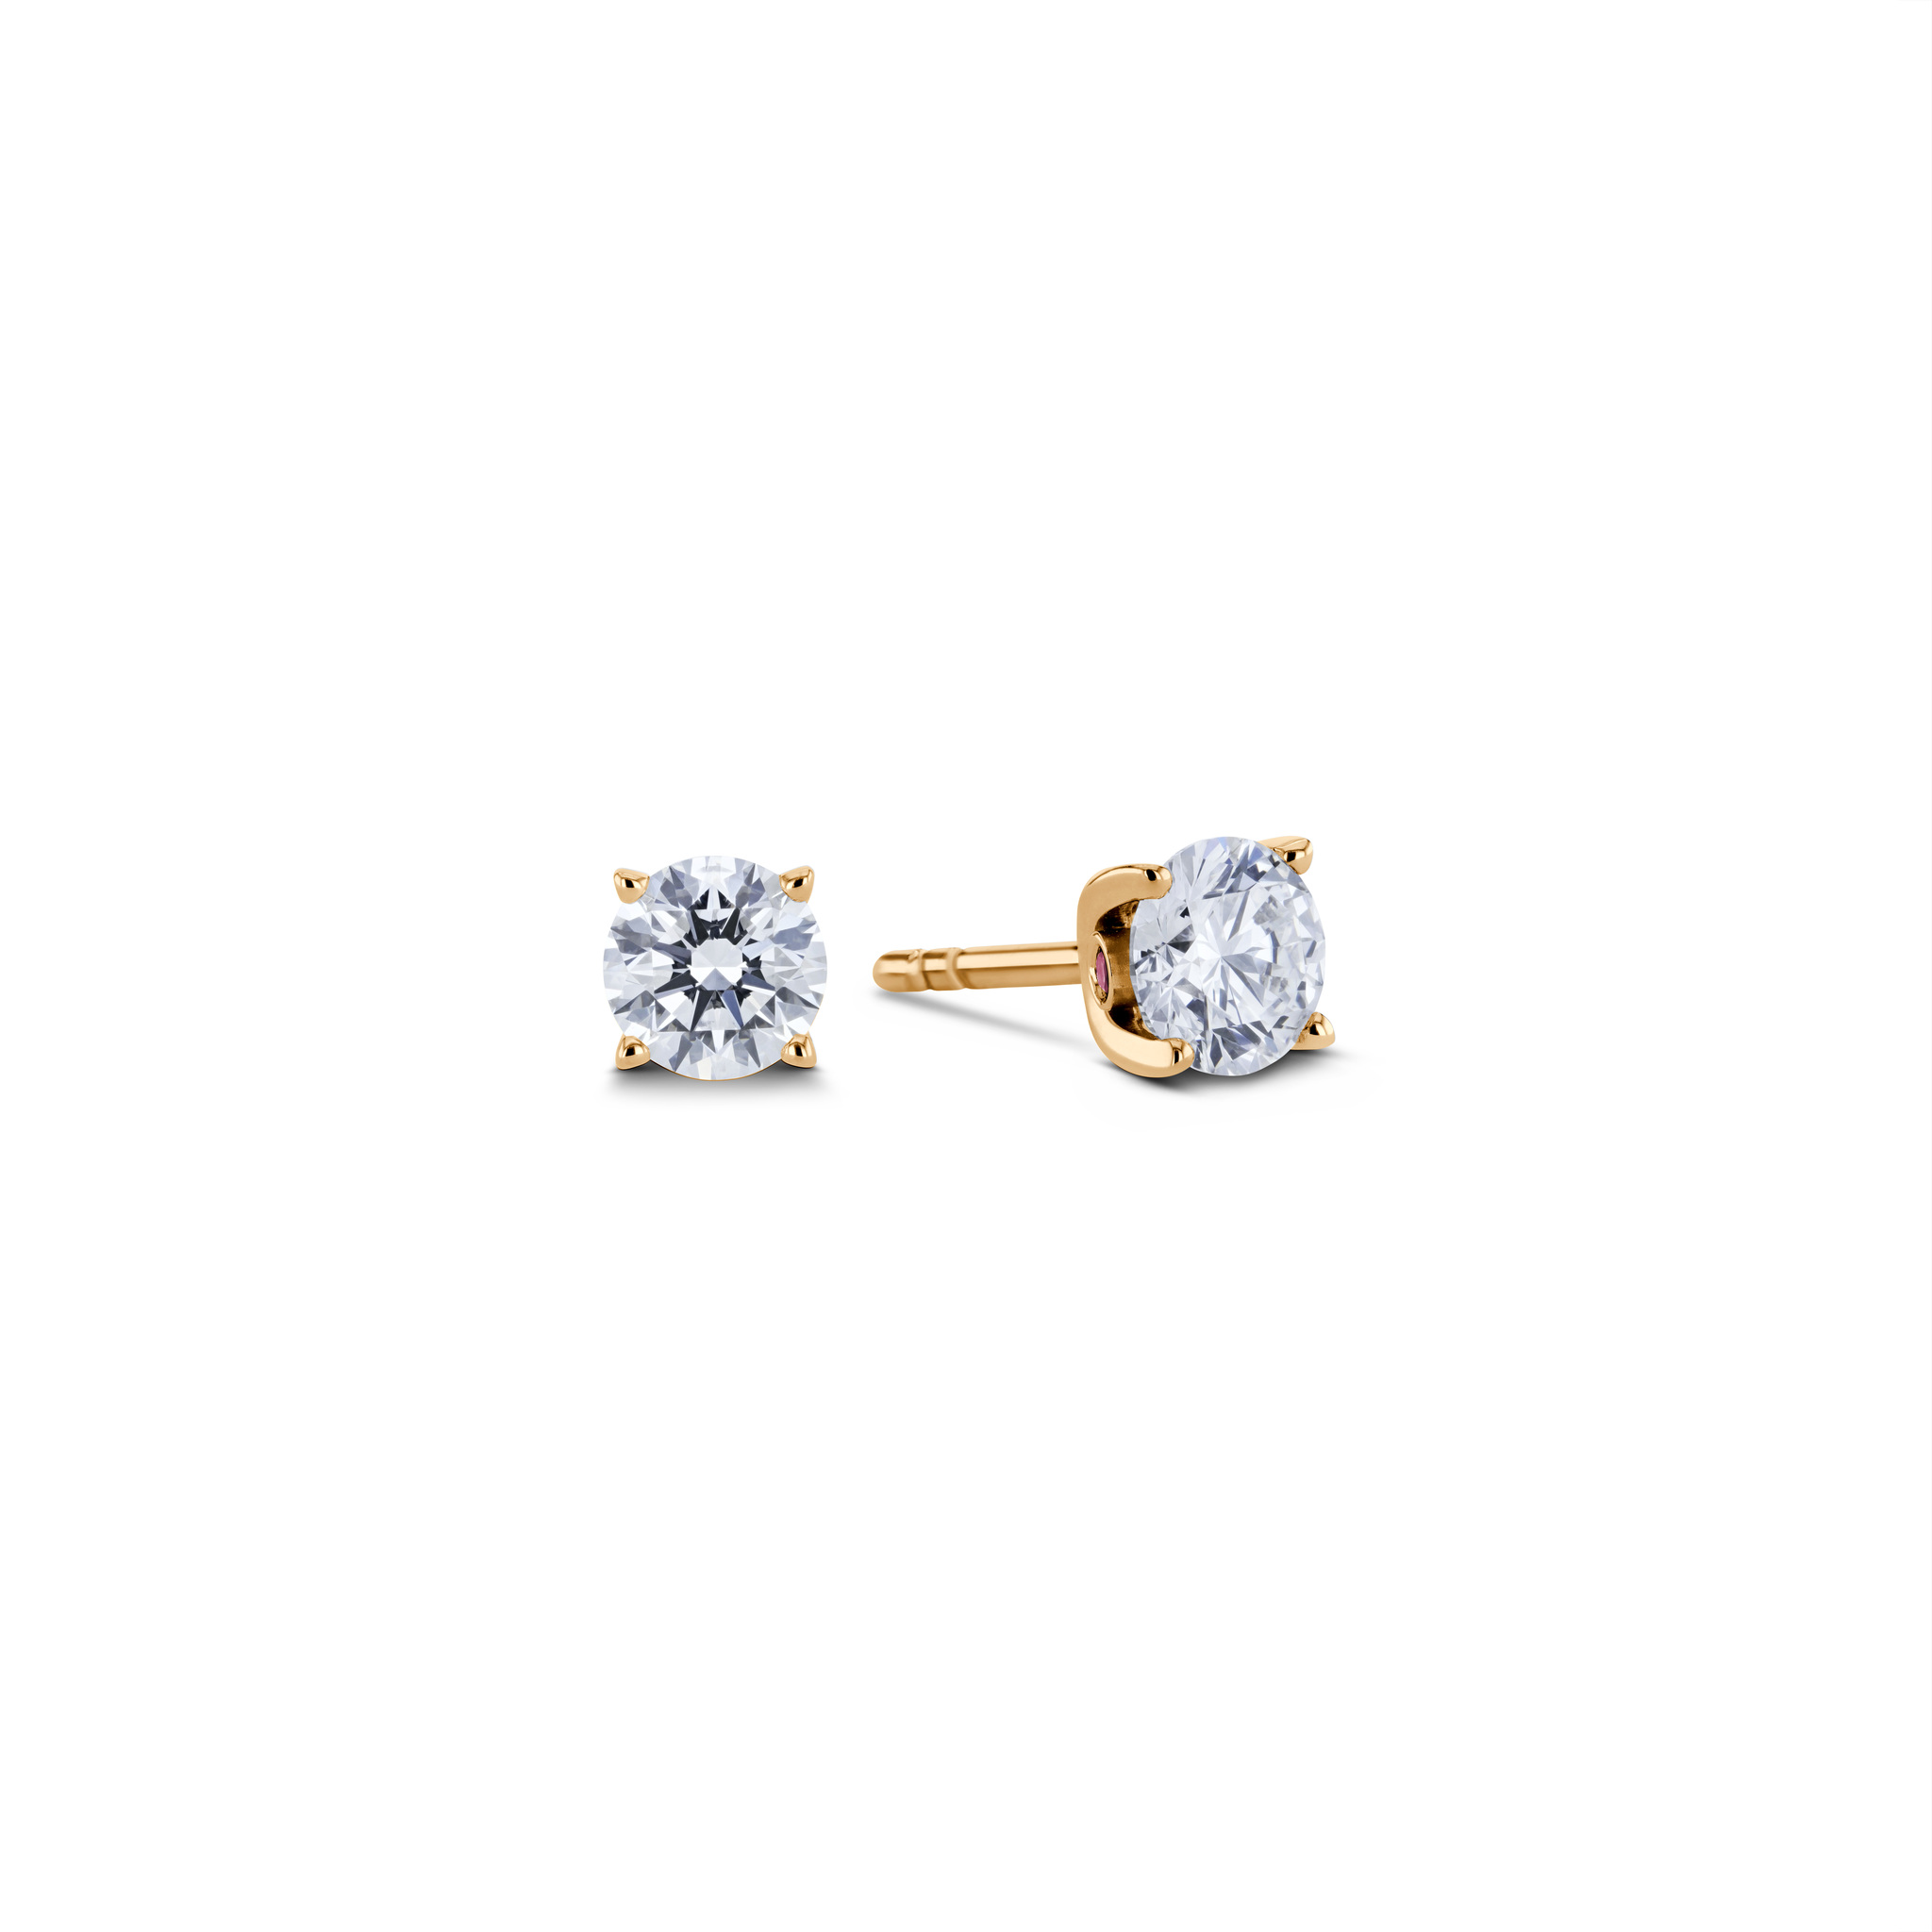 Solitaire earrings with diamonds